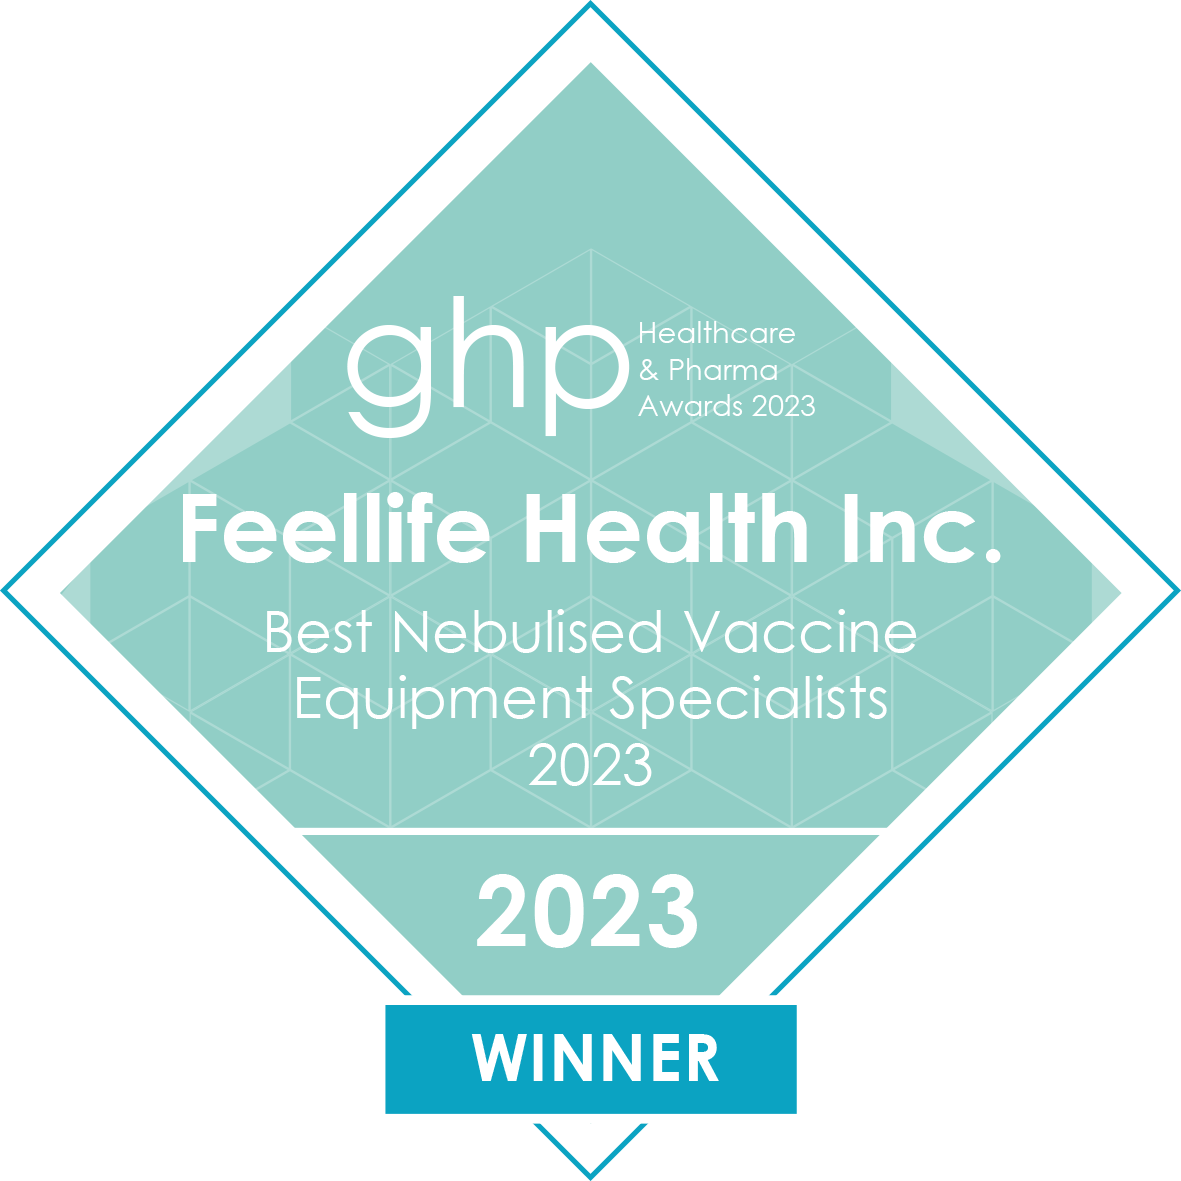 Healthcare and Pharma Awards-Best Nebulised Vaccine Equipment Specialists